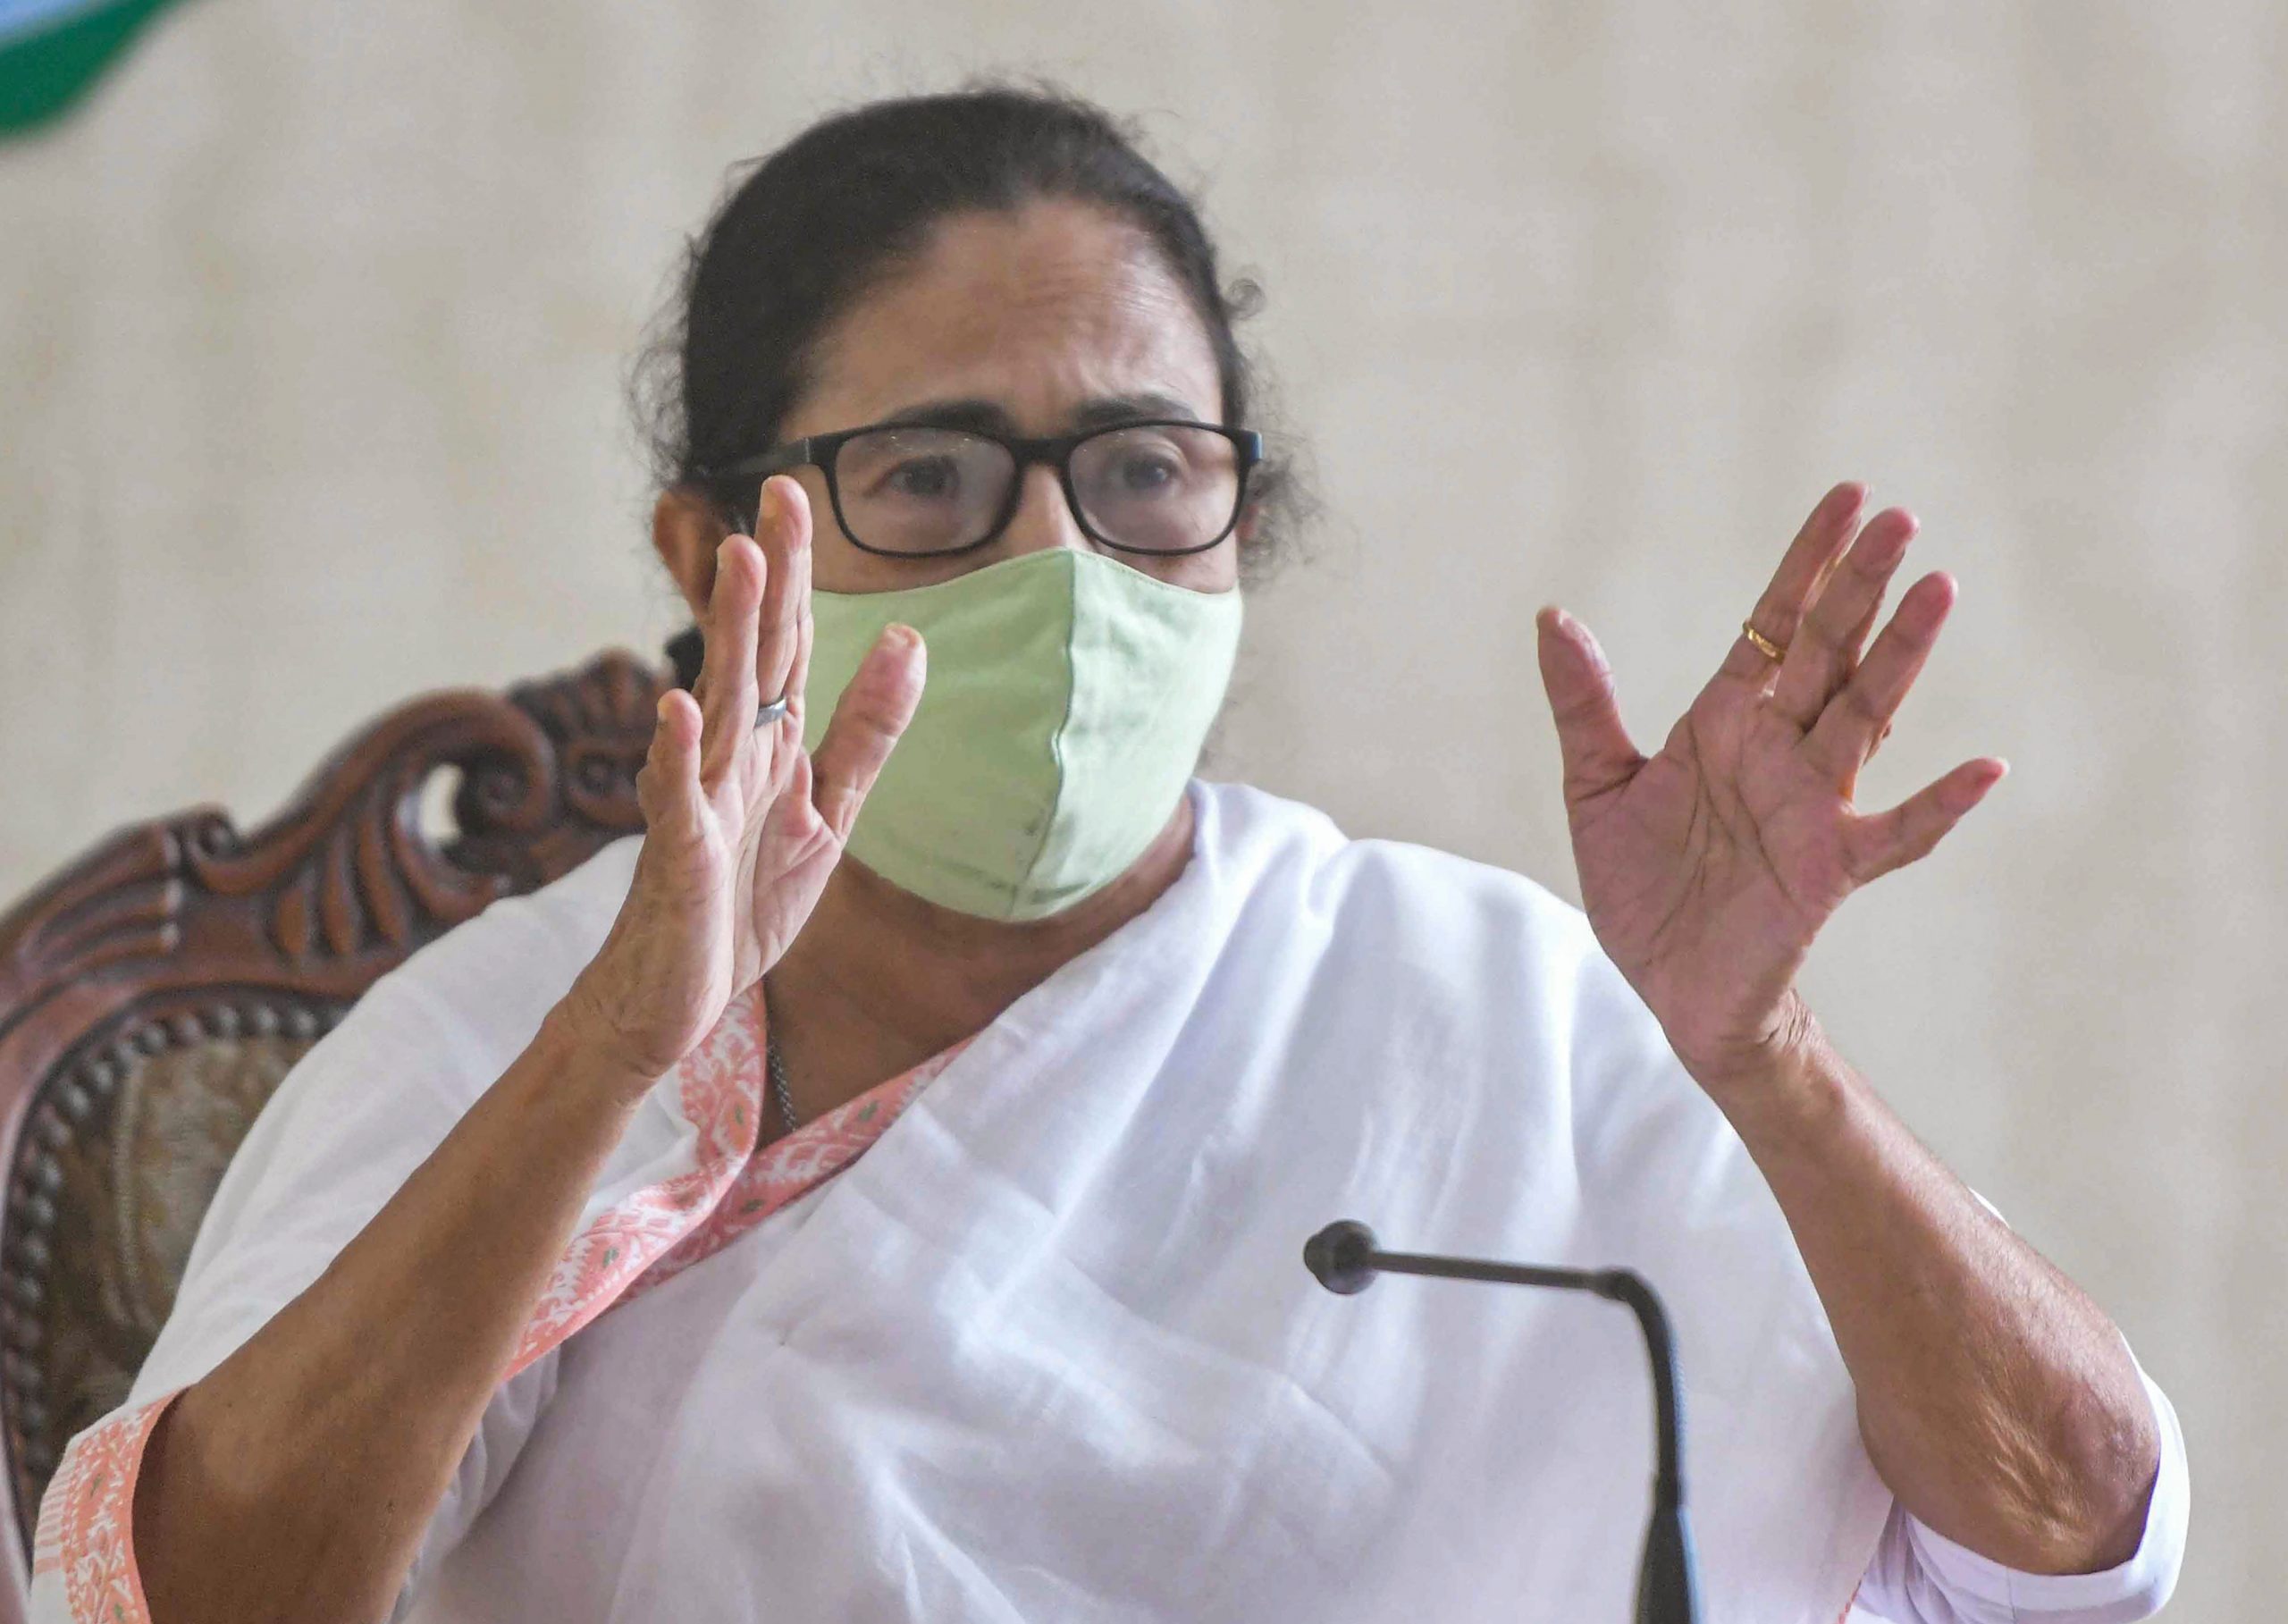 ‘It was super flop’, says Mamata Banerjee on meeting with PM Modi